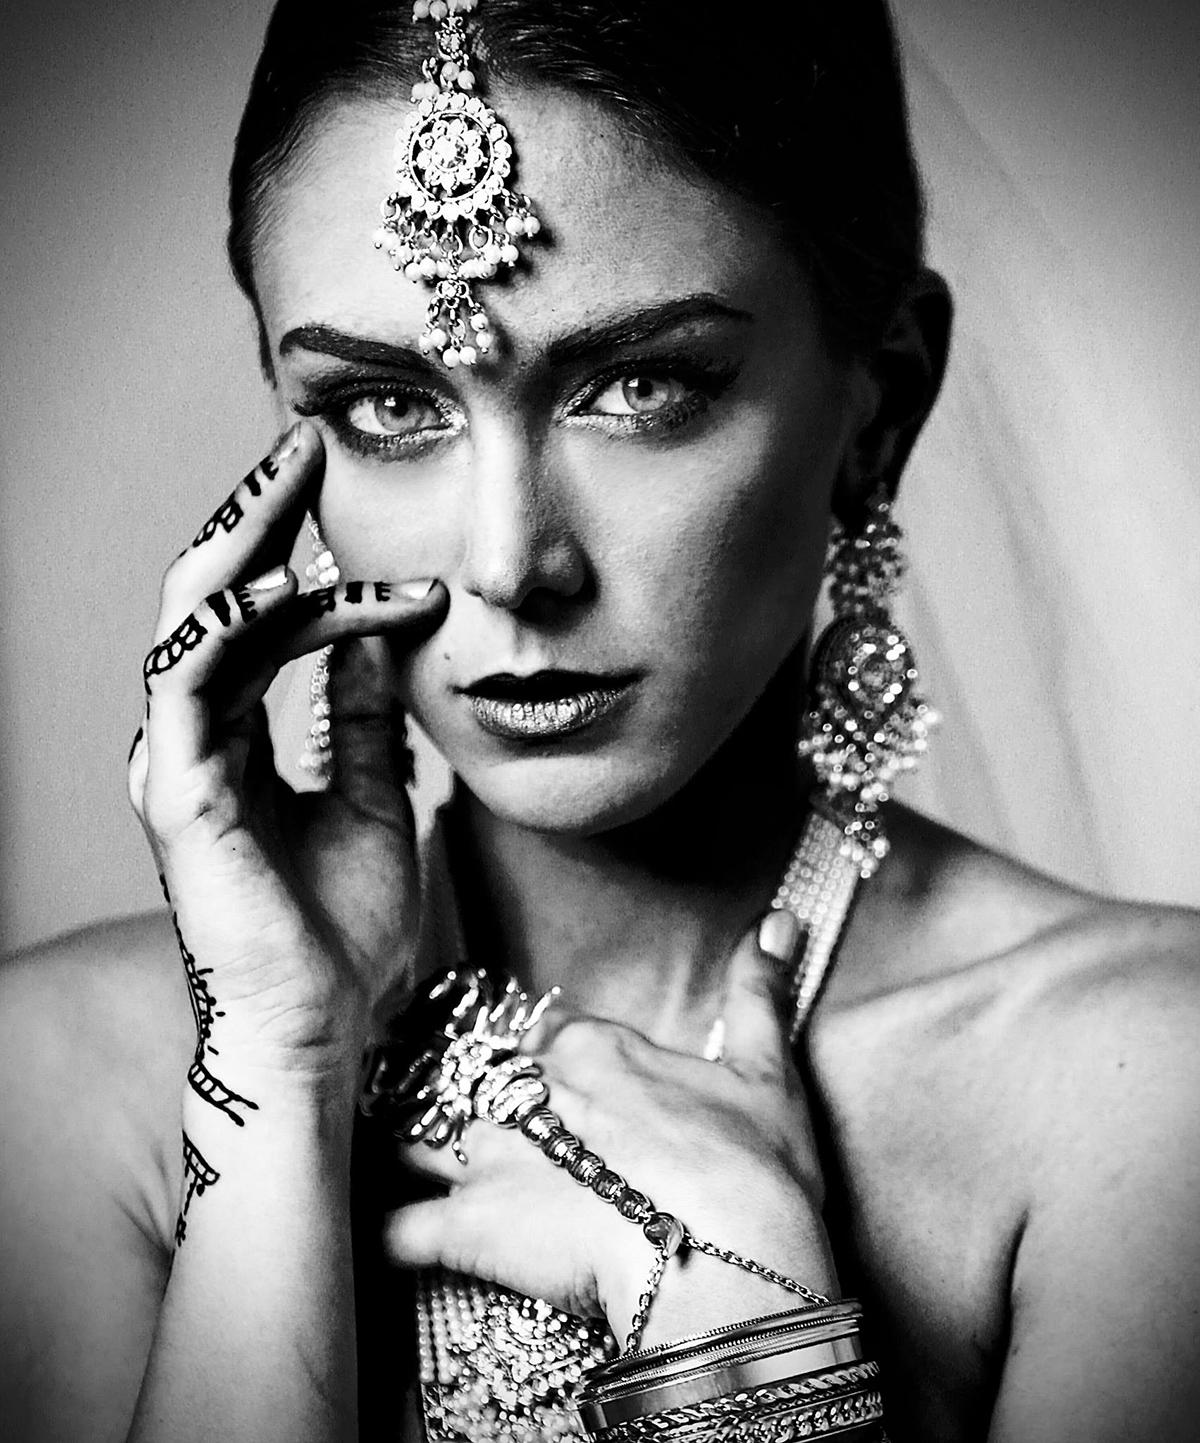 A straight-on black-and-white portrait of a woman decked in jewelry.